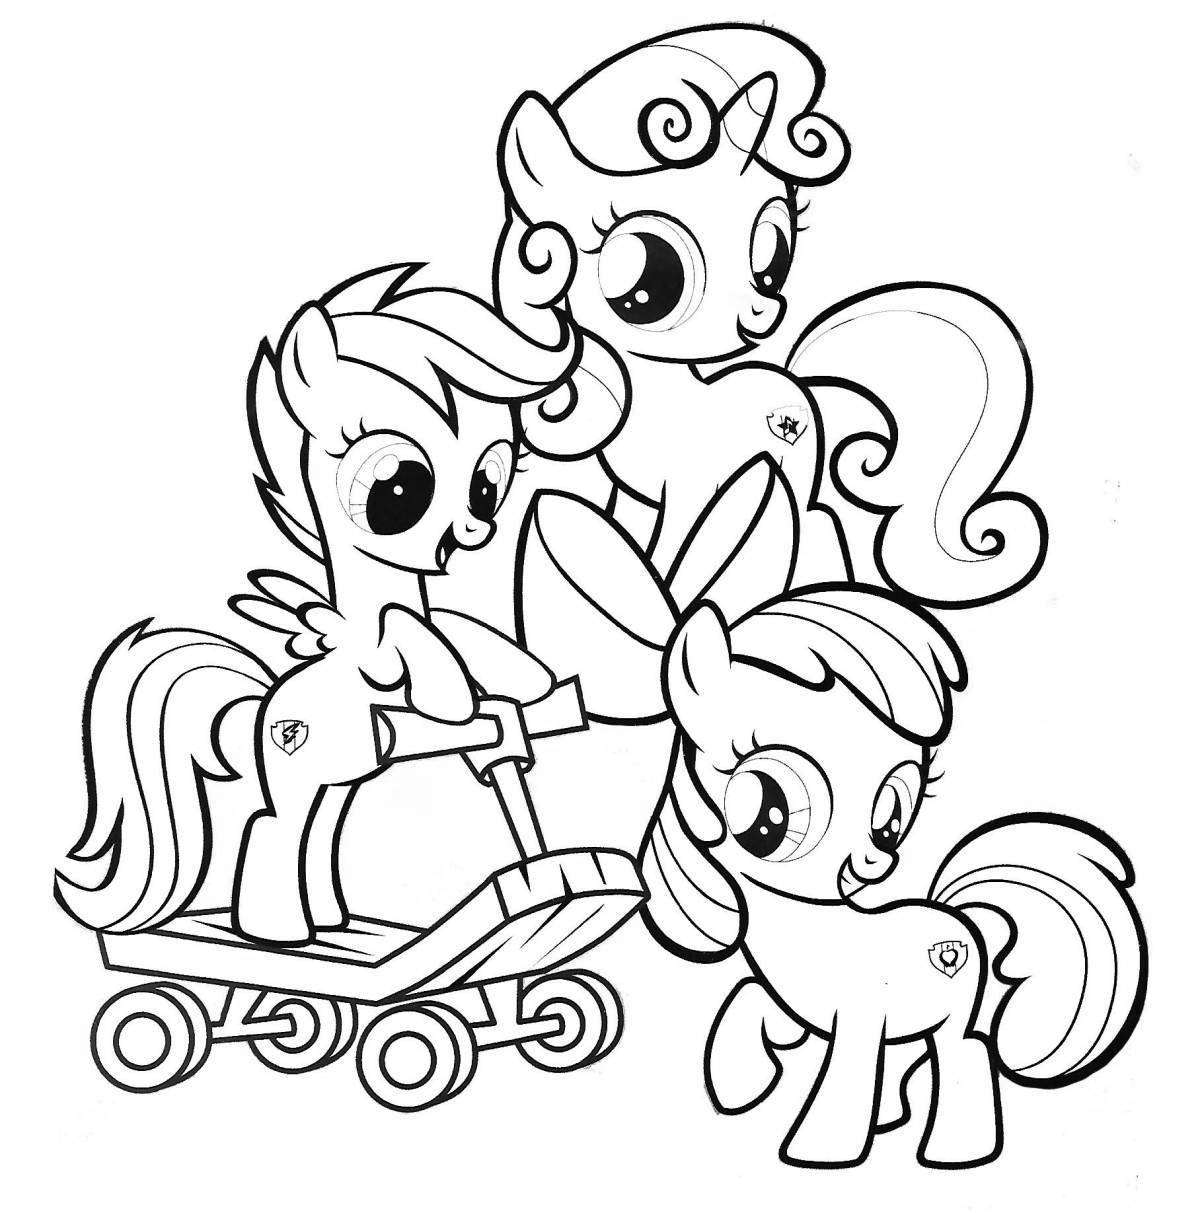 Moo little pony playful coloring